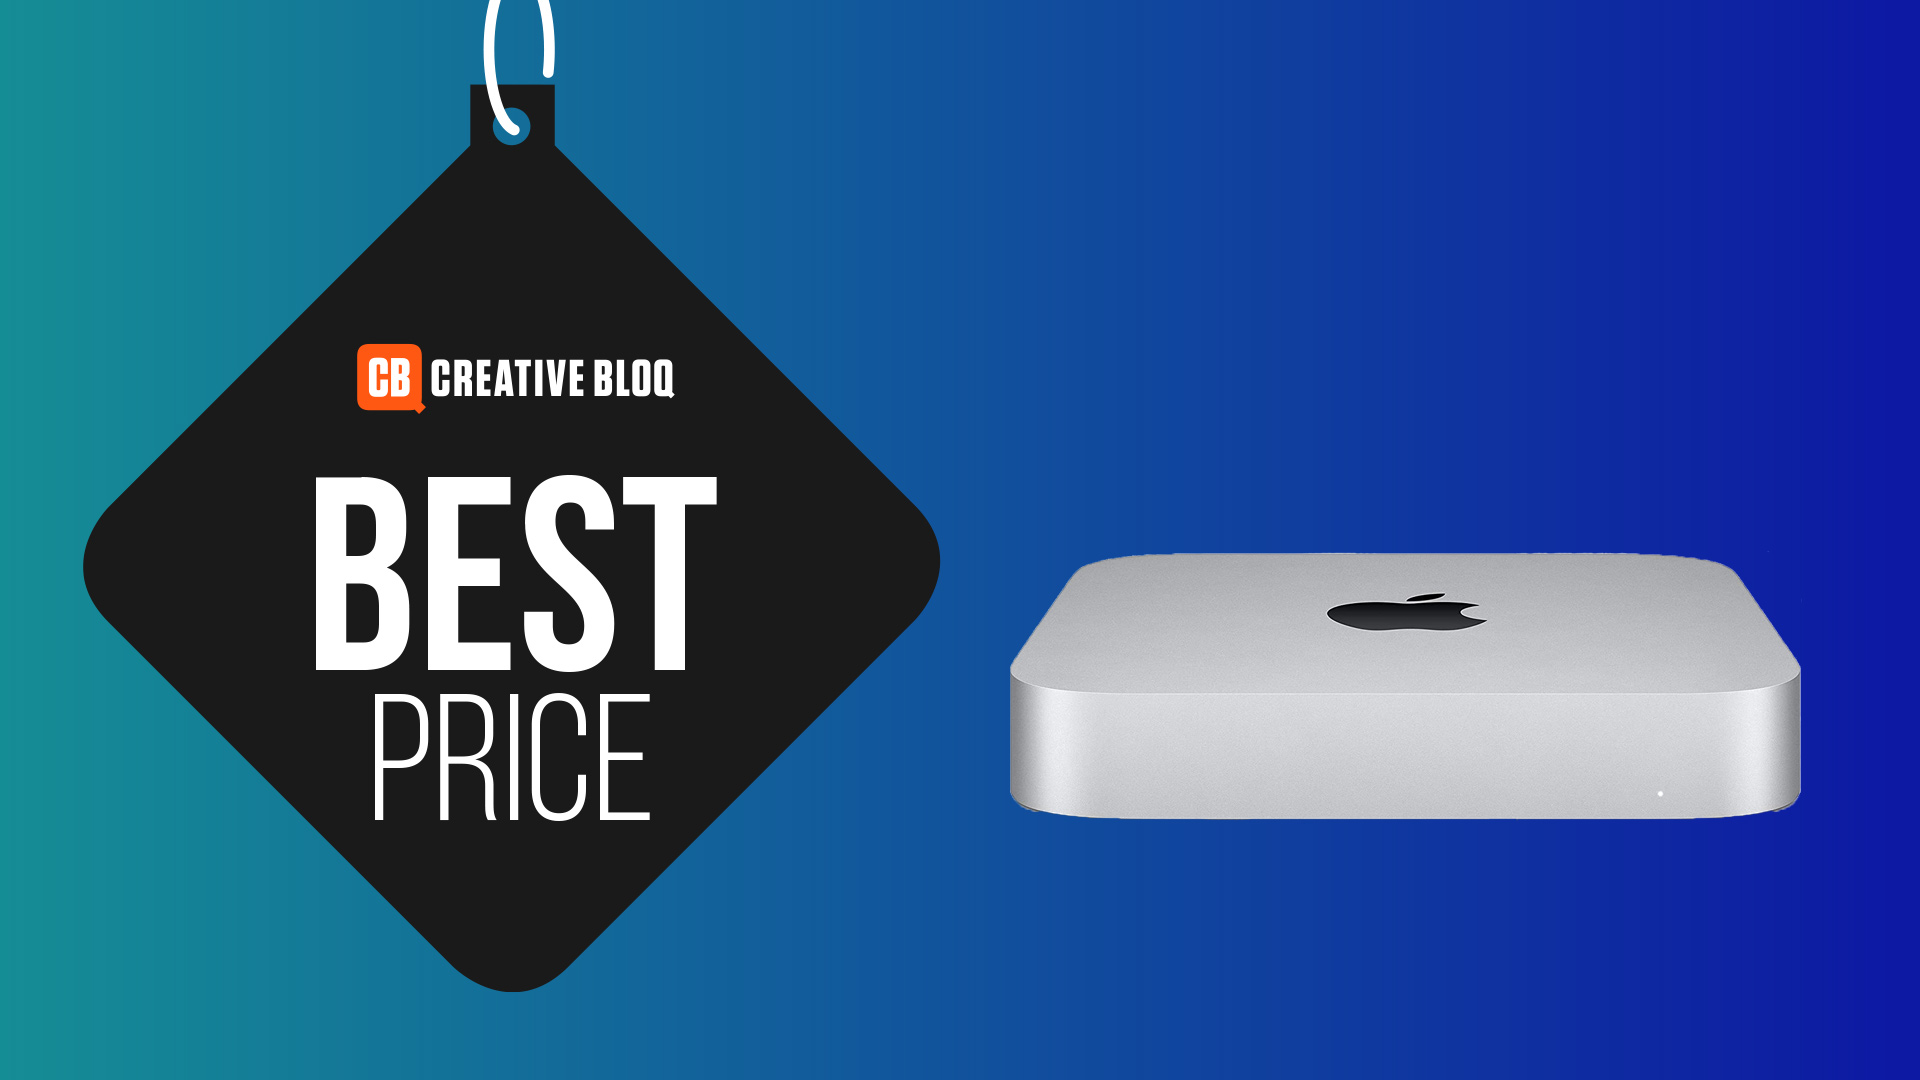 Save big on Apple's Mac mini with this limited-time saving